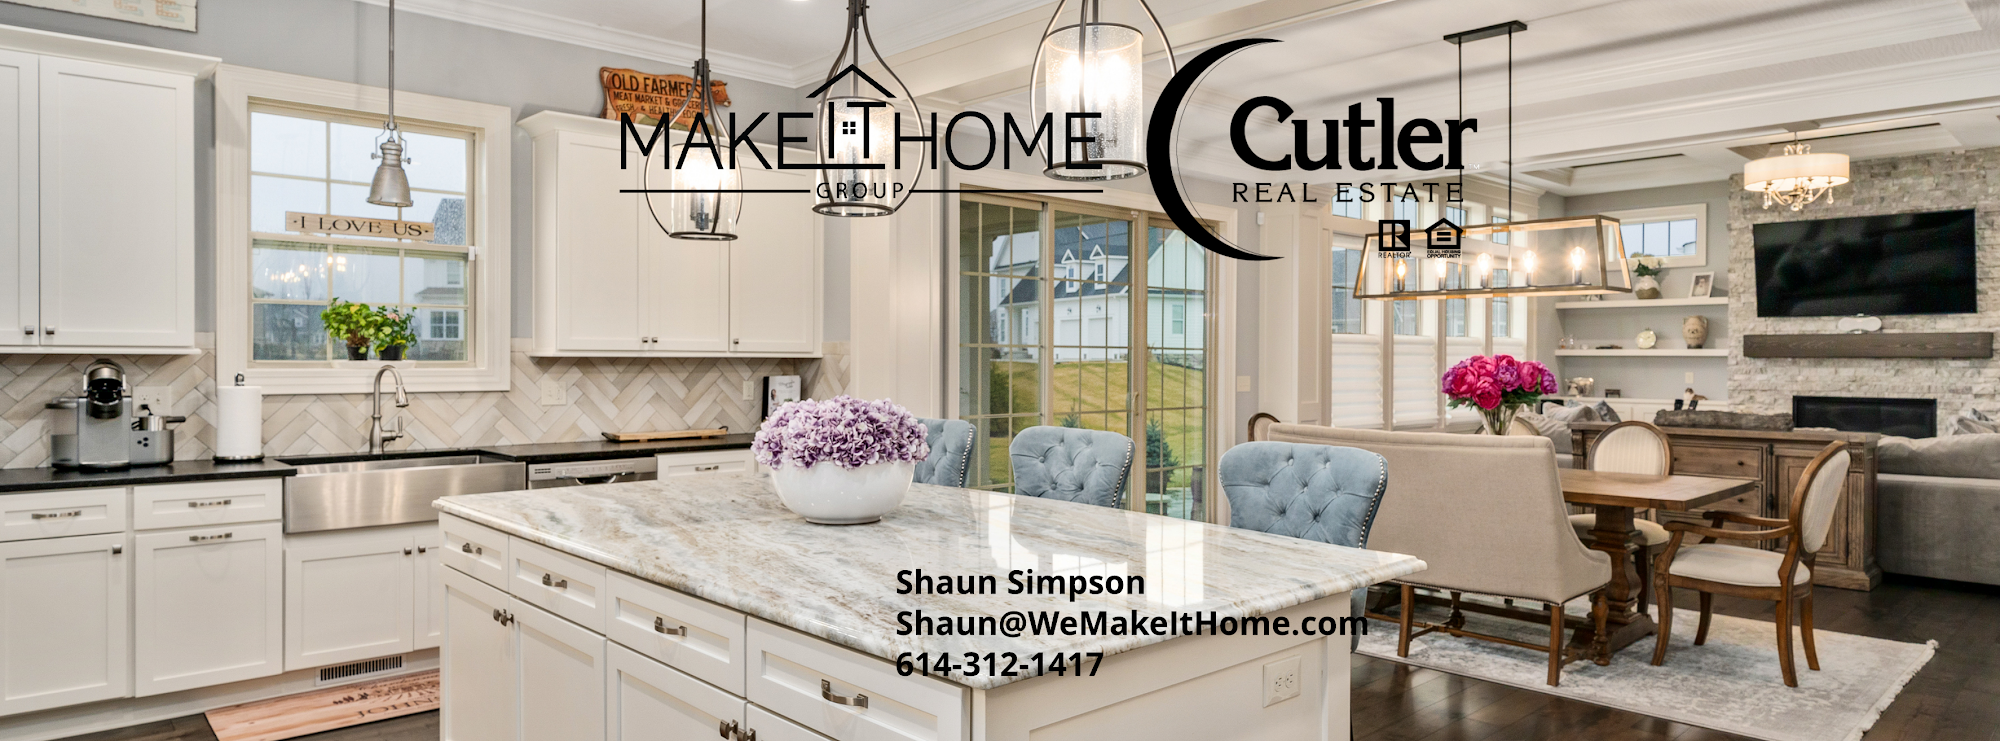 Shaun Simpson and the Make It Home Group. REALTORS at Cutler Real Estate